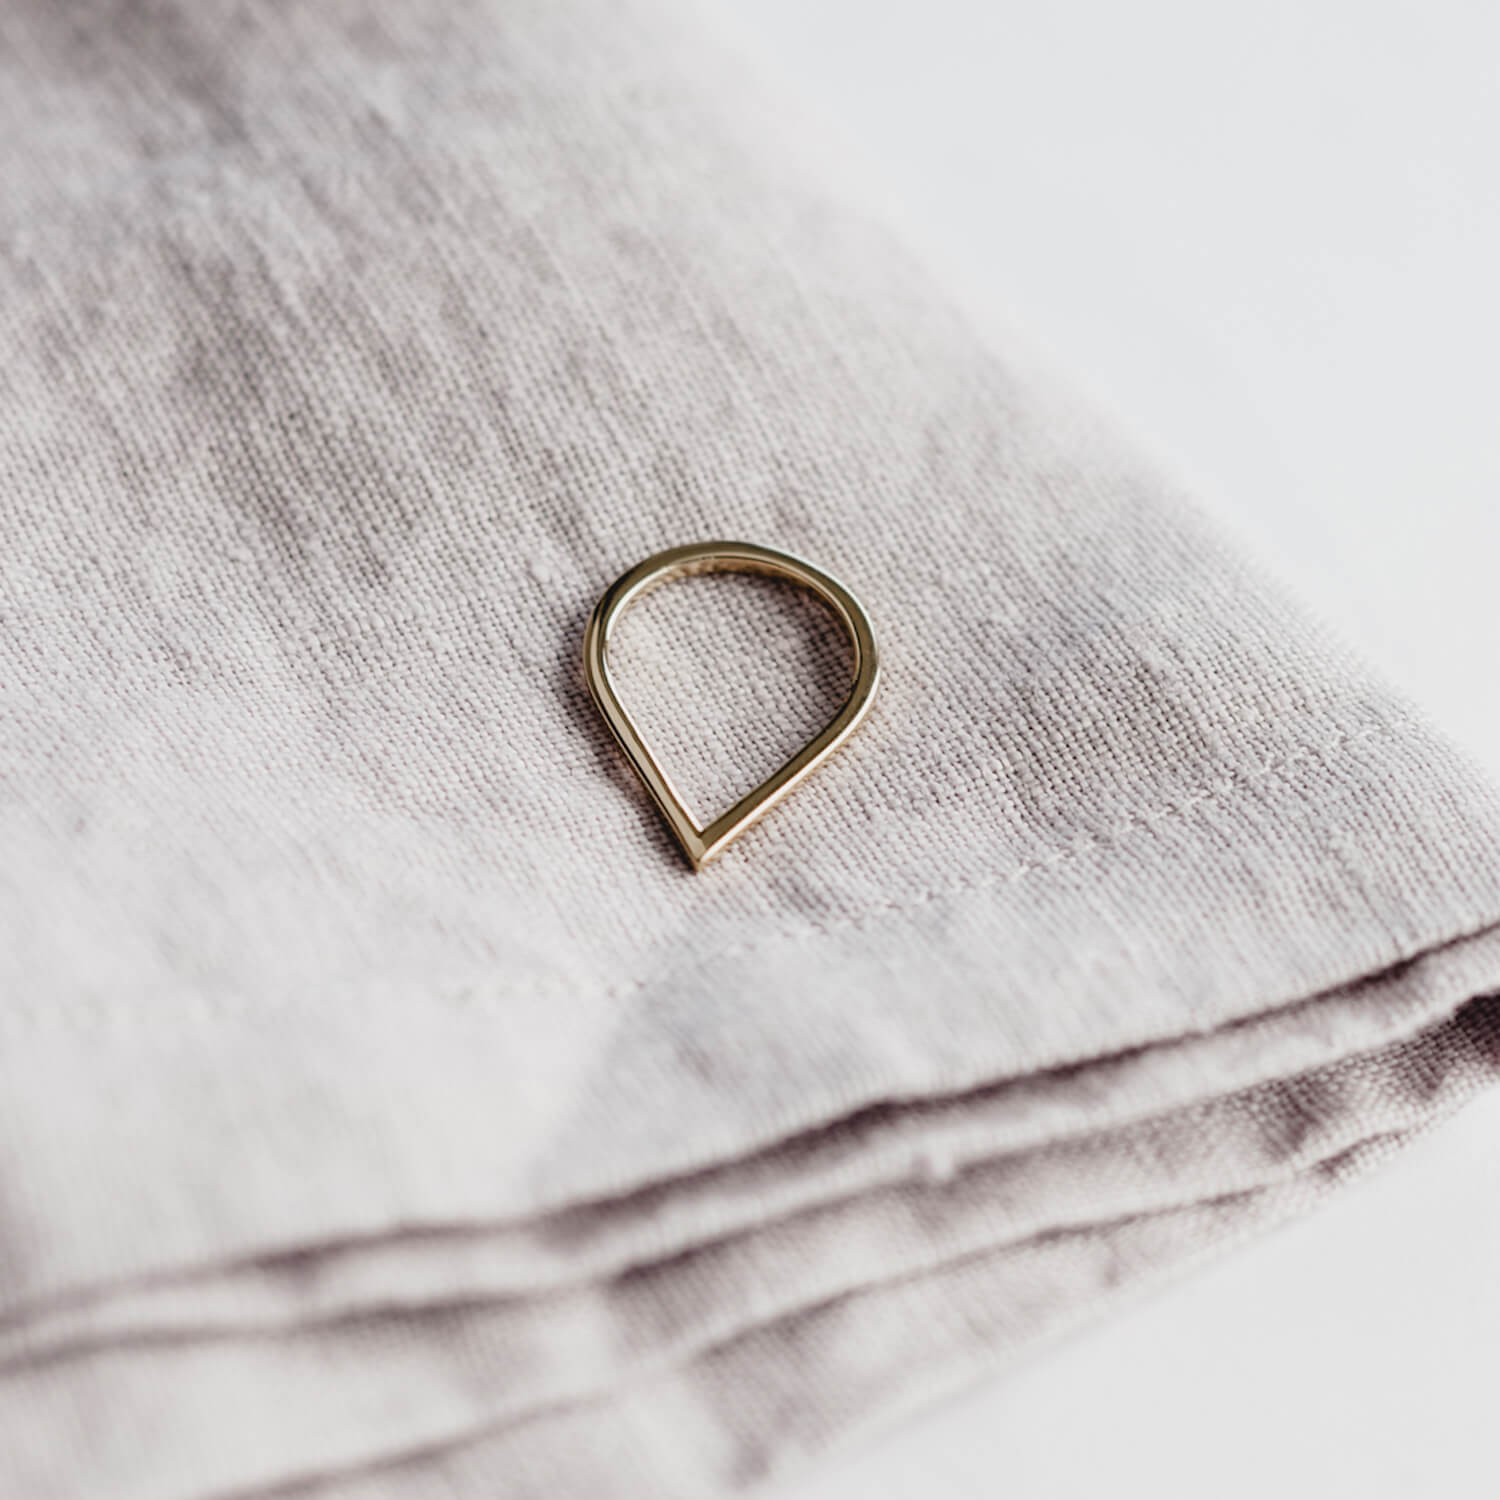 Close up of rose gold Point Ring against a rough cloth bakground